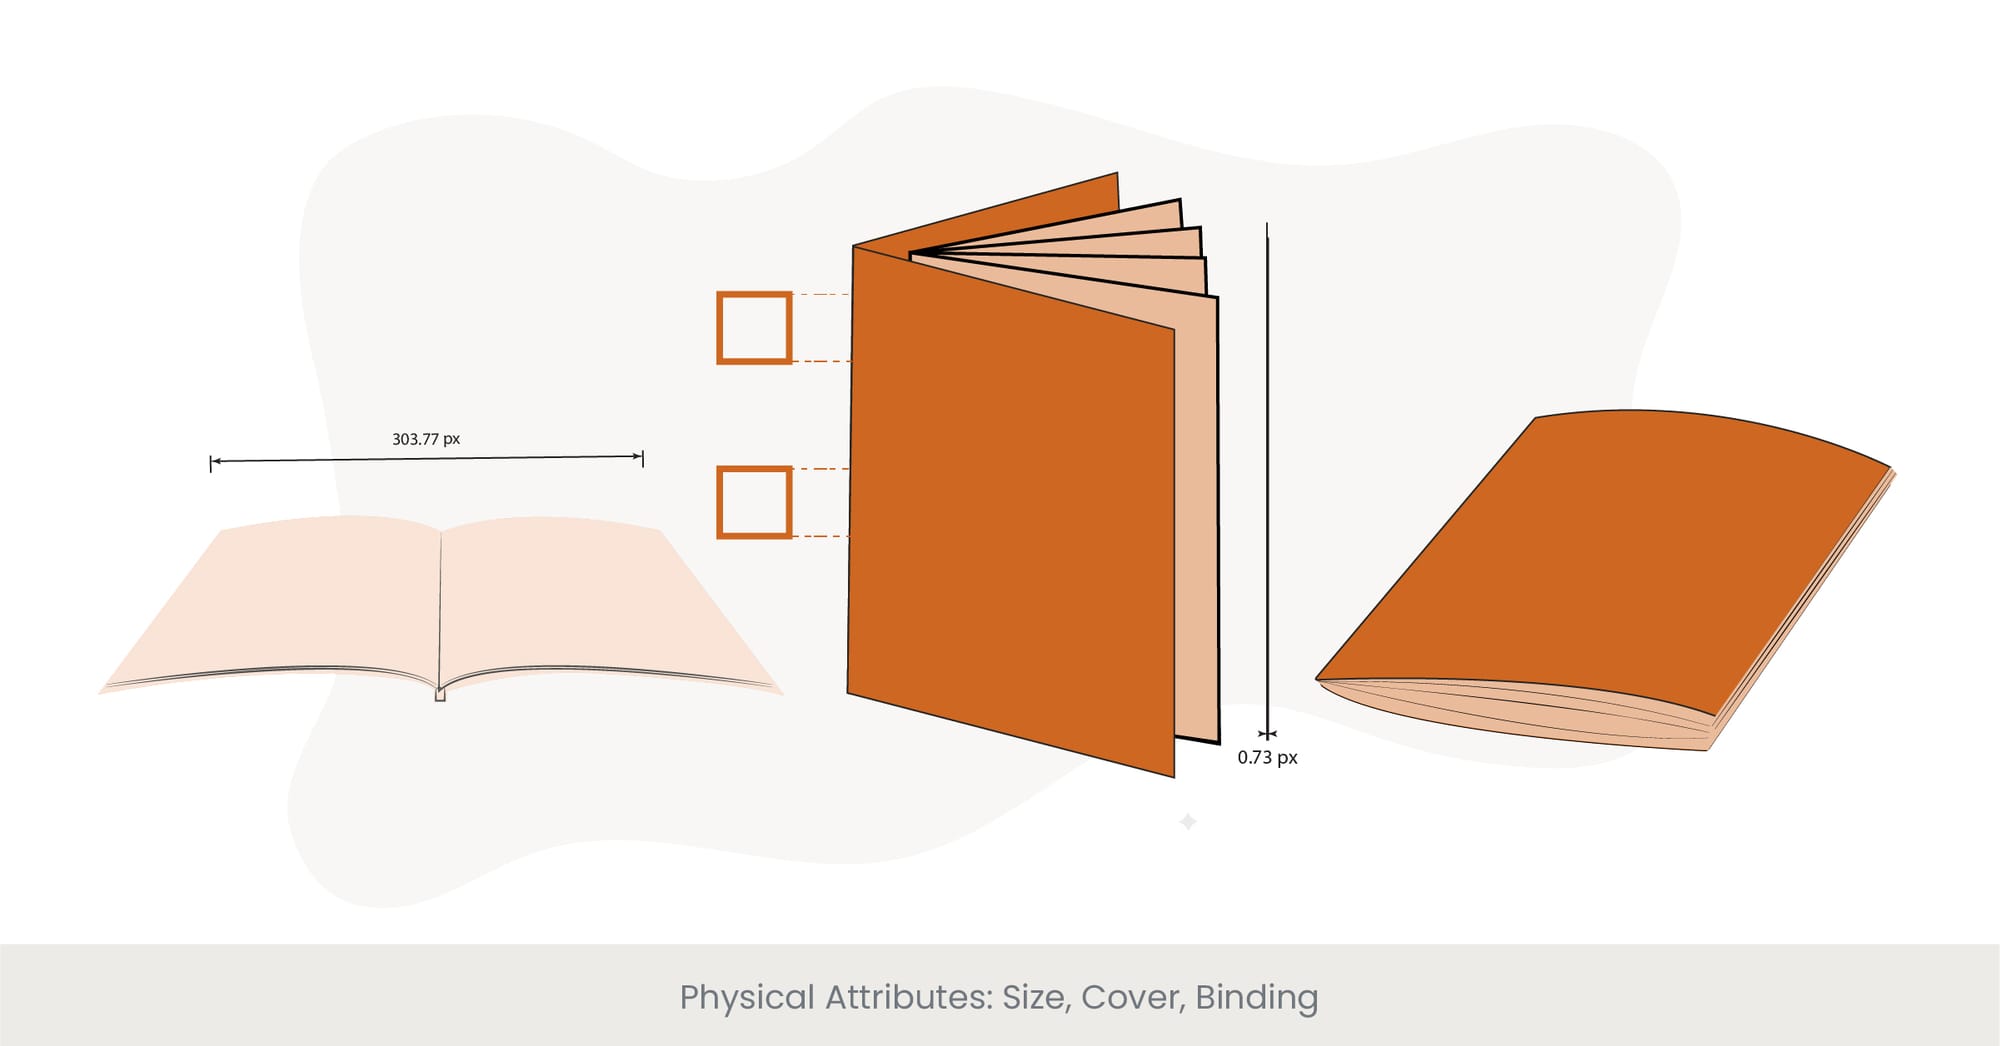 Physical Attributes: Size, Cover, Binding